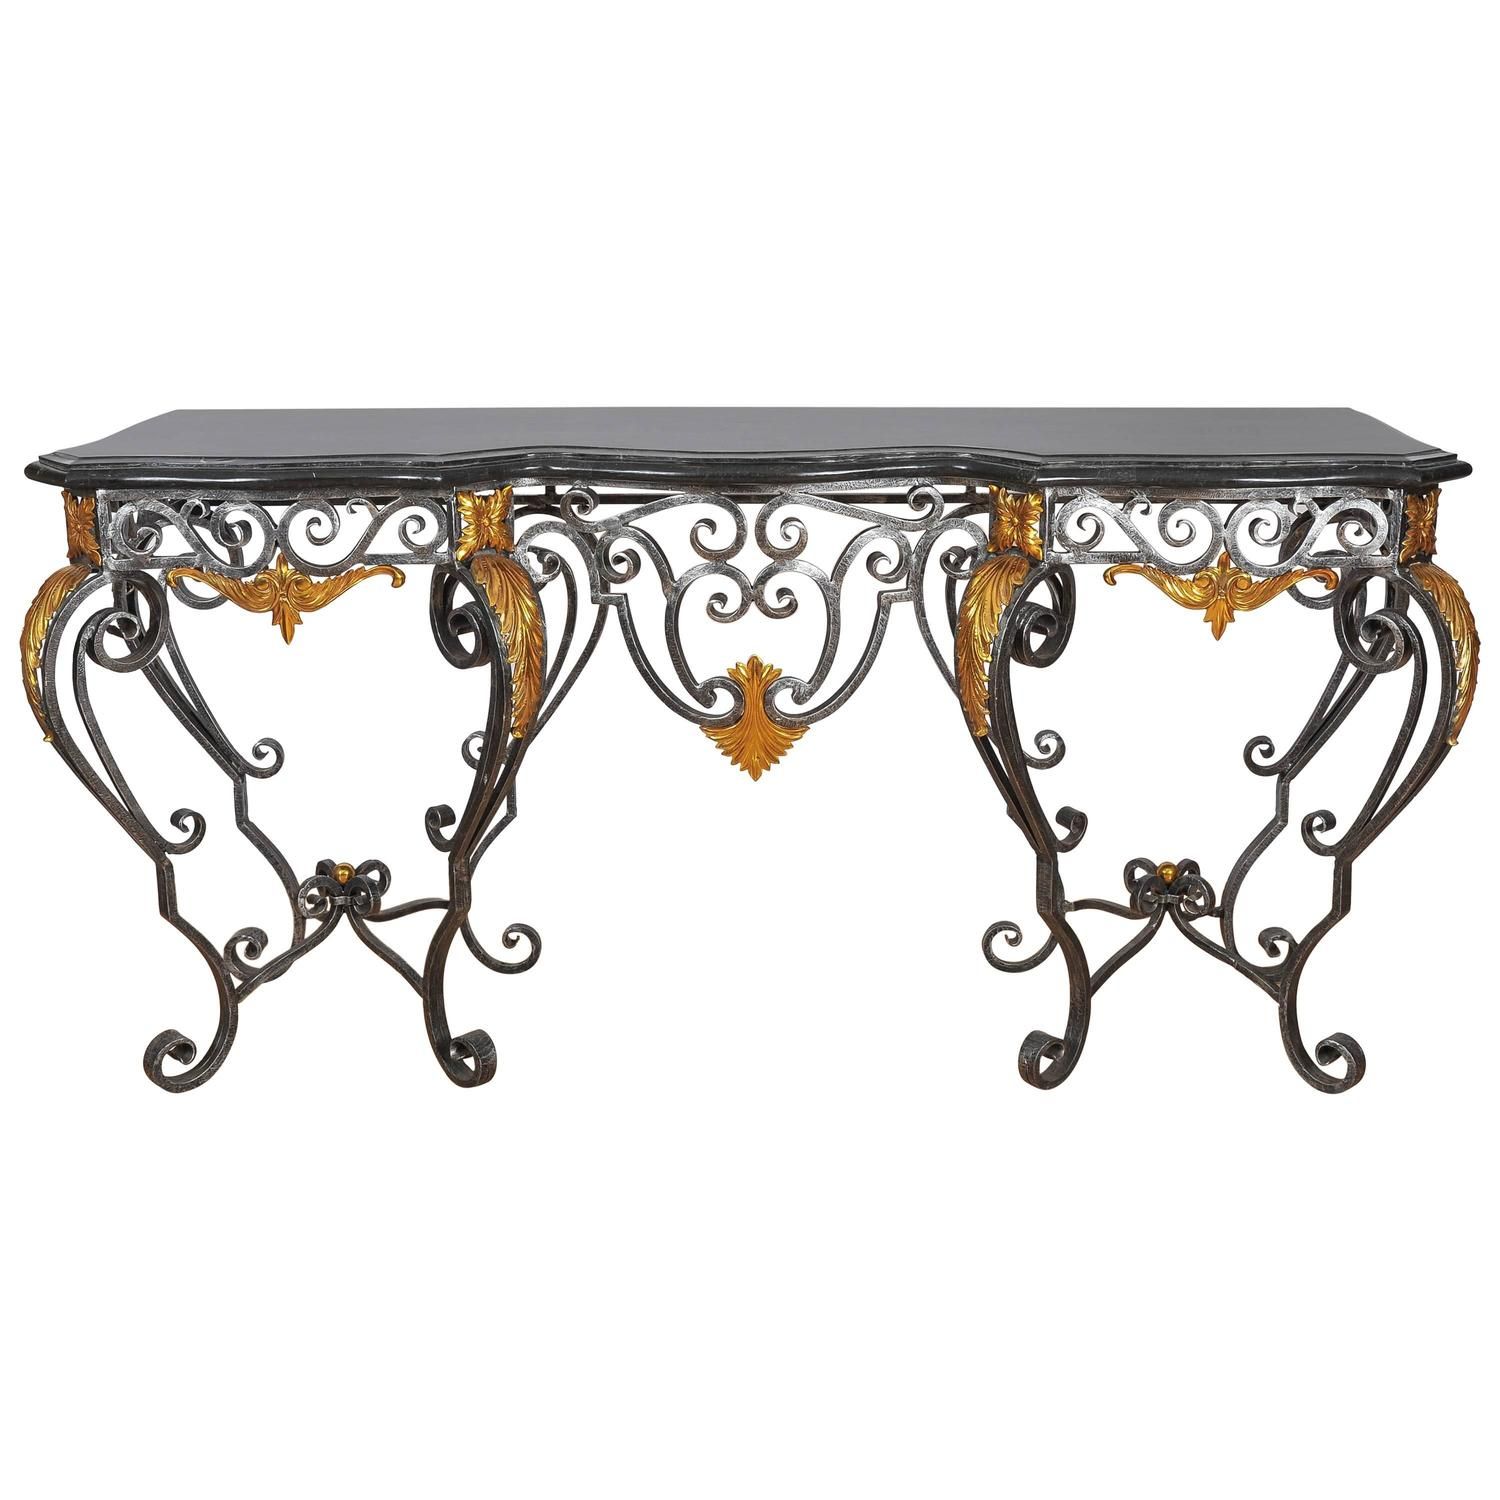 Late 20th Century Wrought Iron Console Table With Marble With Regard To Wrought Iron Console Tables (View 3 of 20)